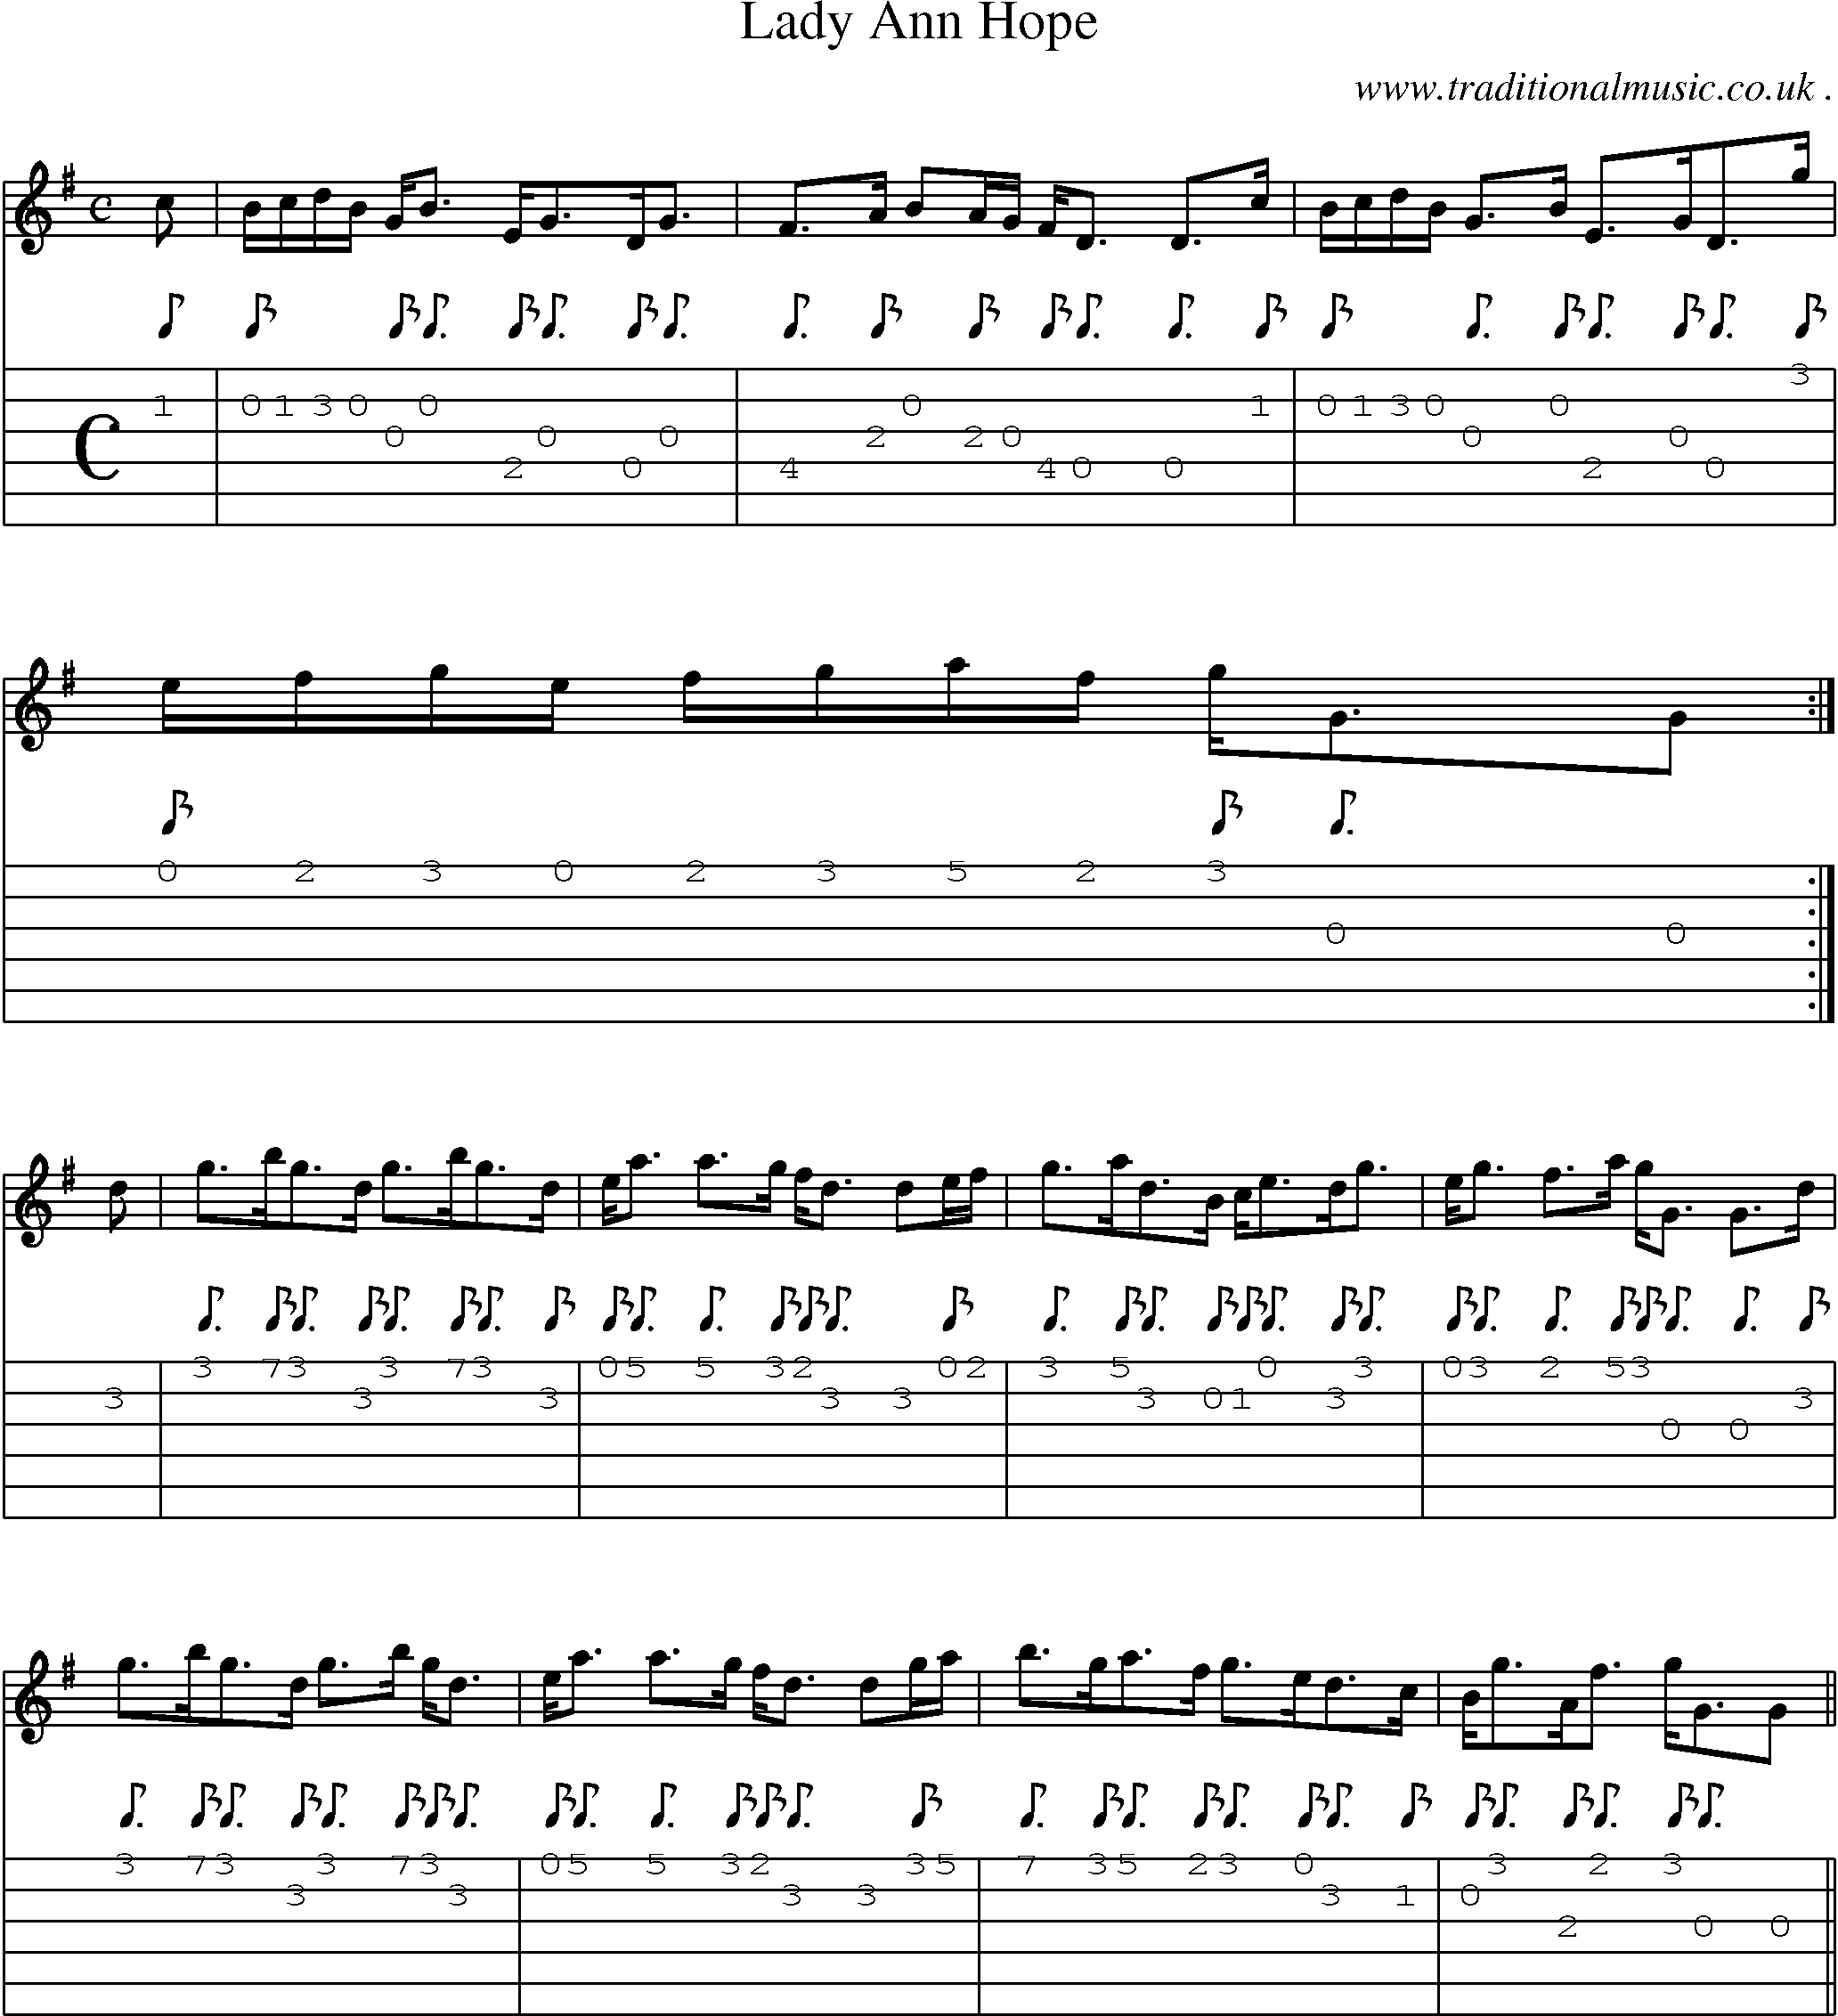 Sheet-music  score, Chords and Guitar Tabs for Lady Ann Hope